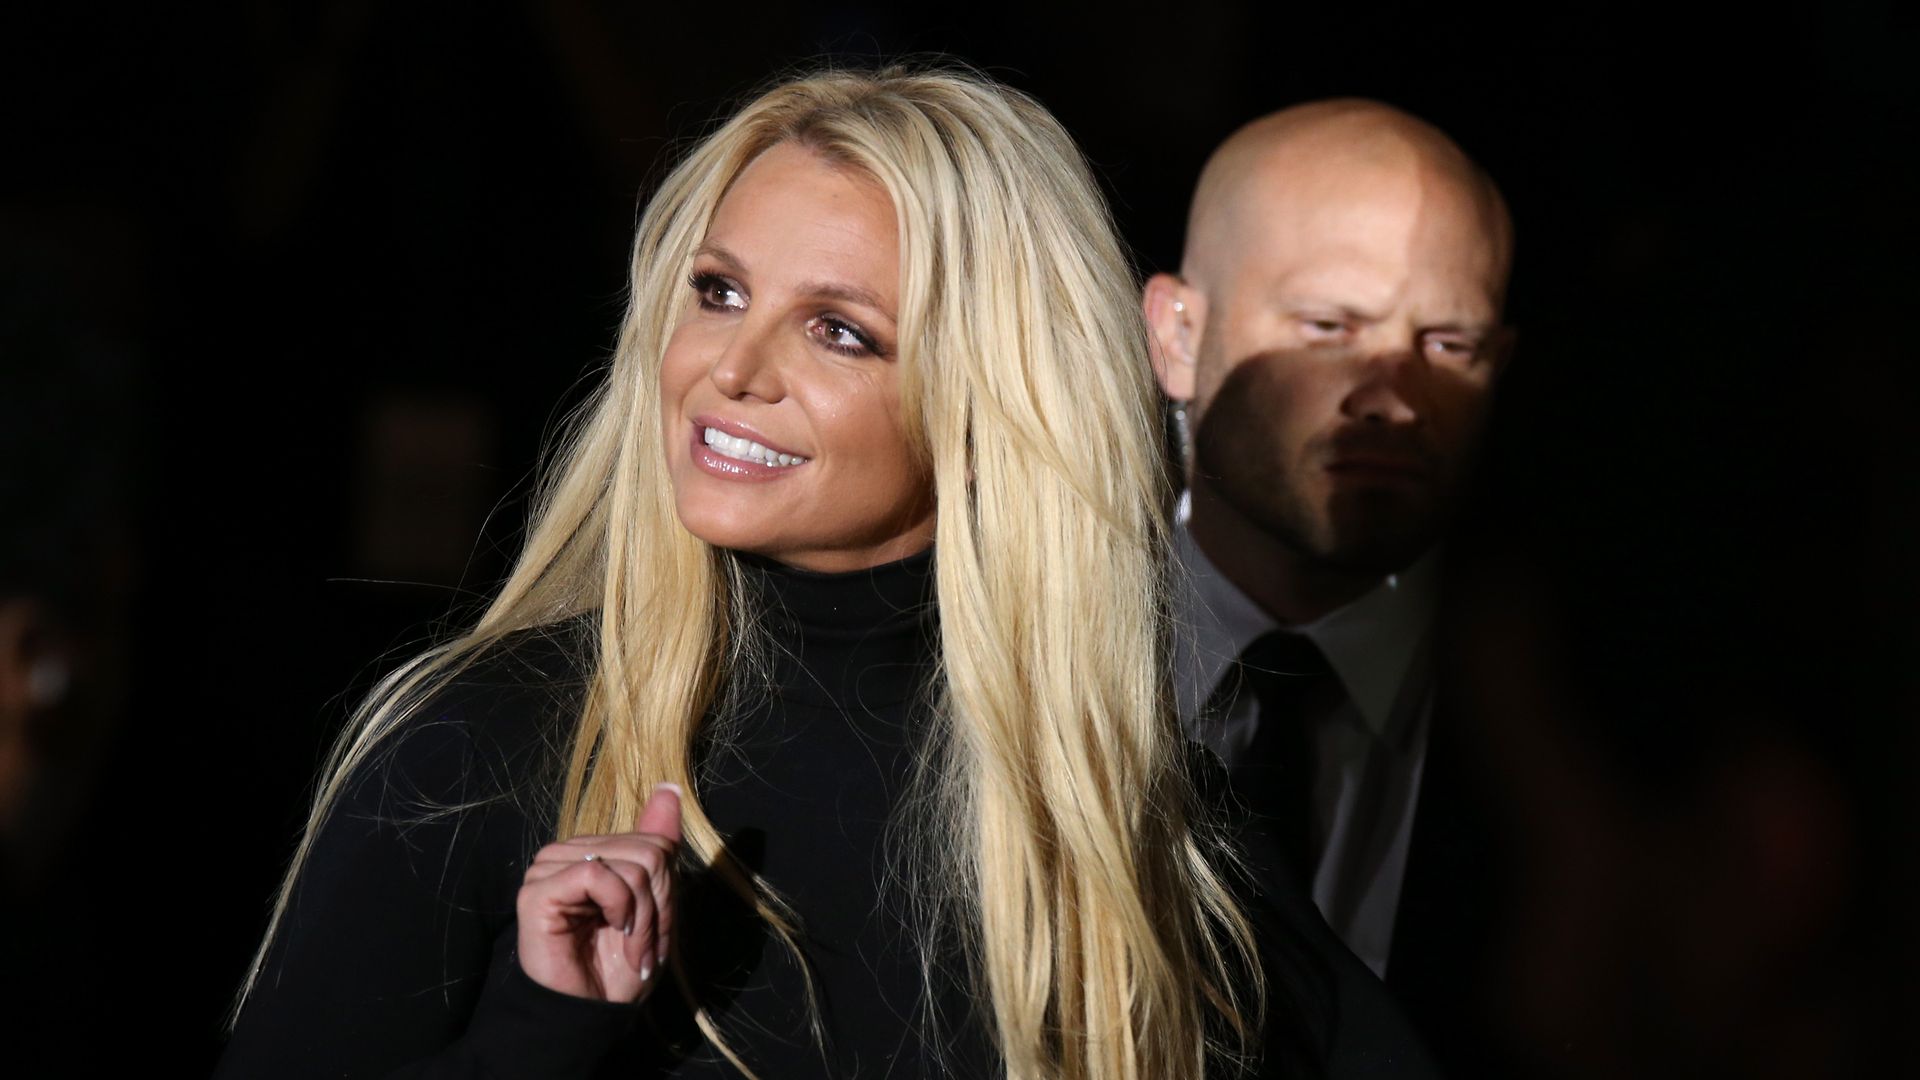 Photo of Britney Spears smiling with a security guard next to her